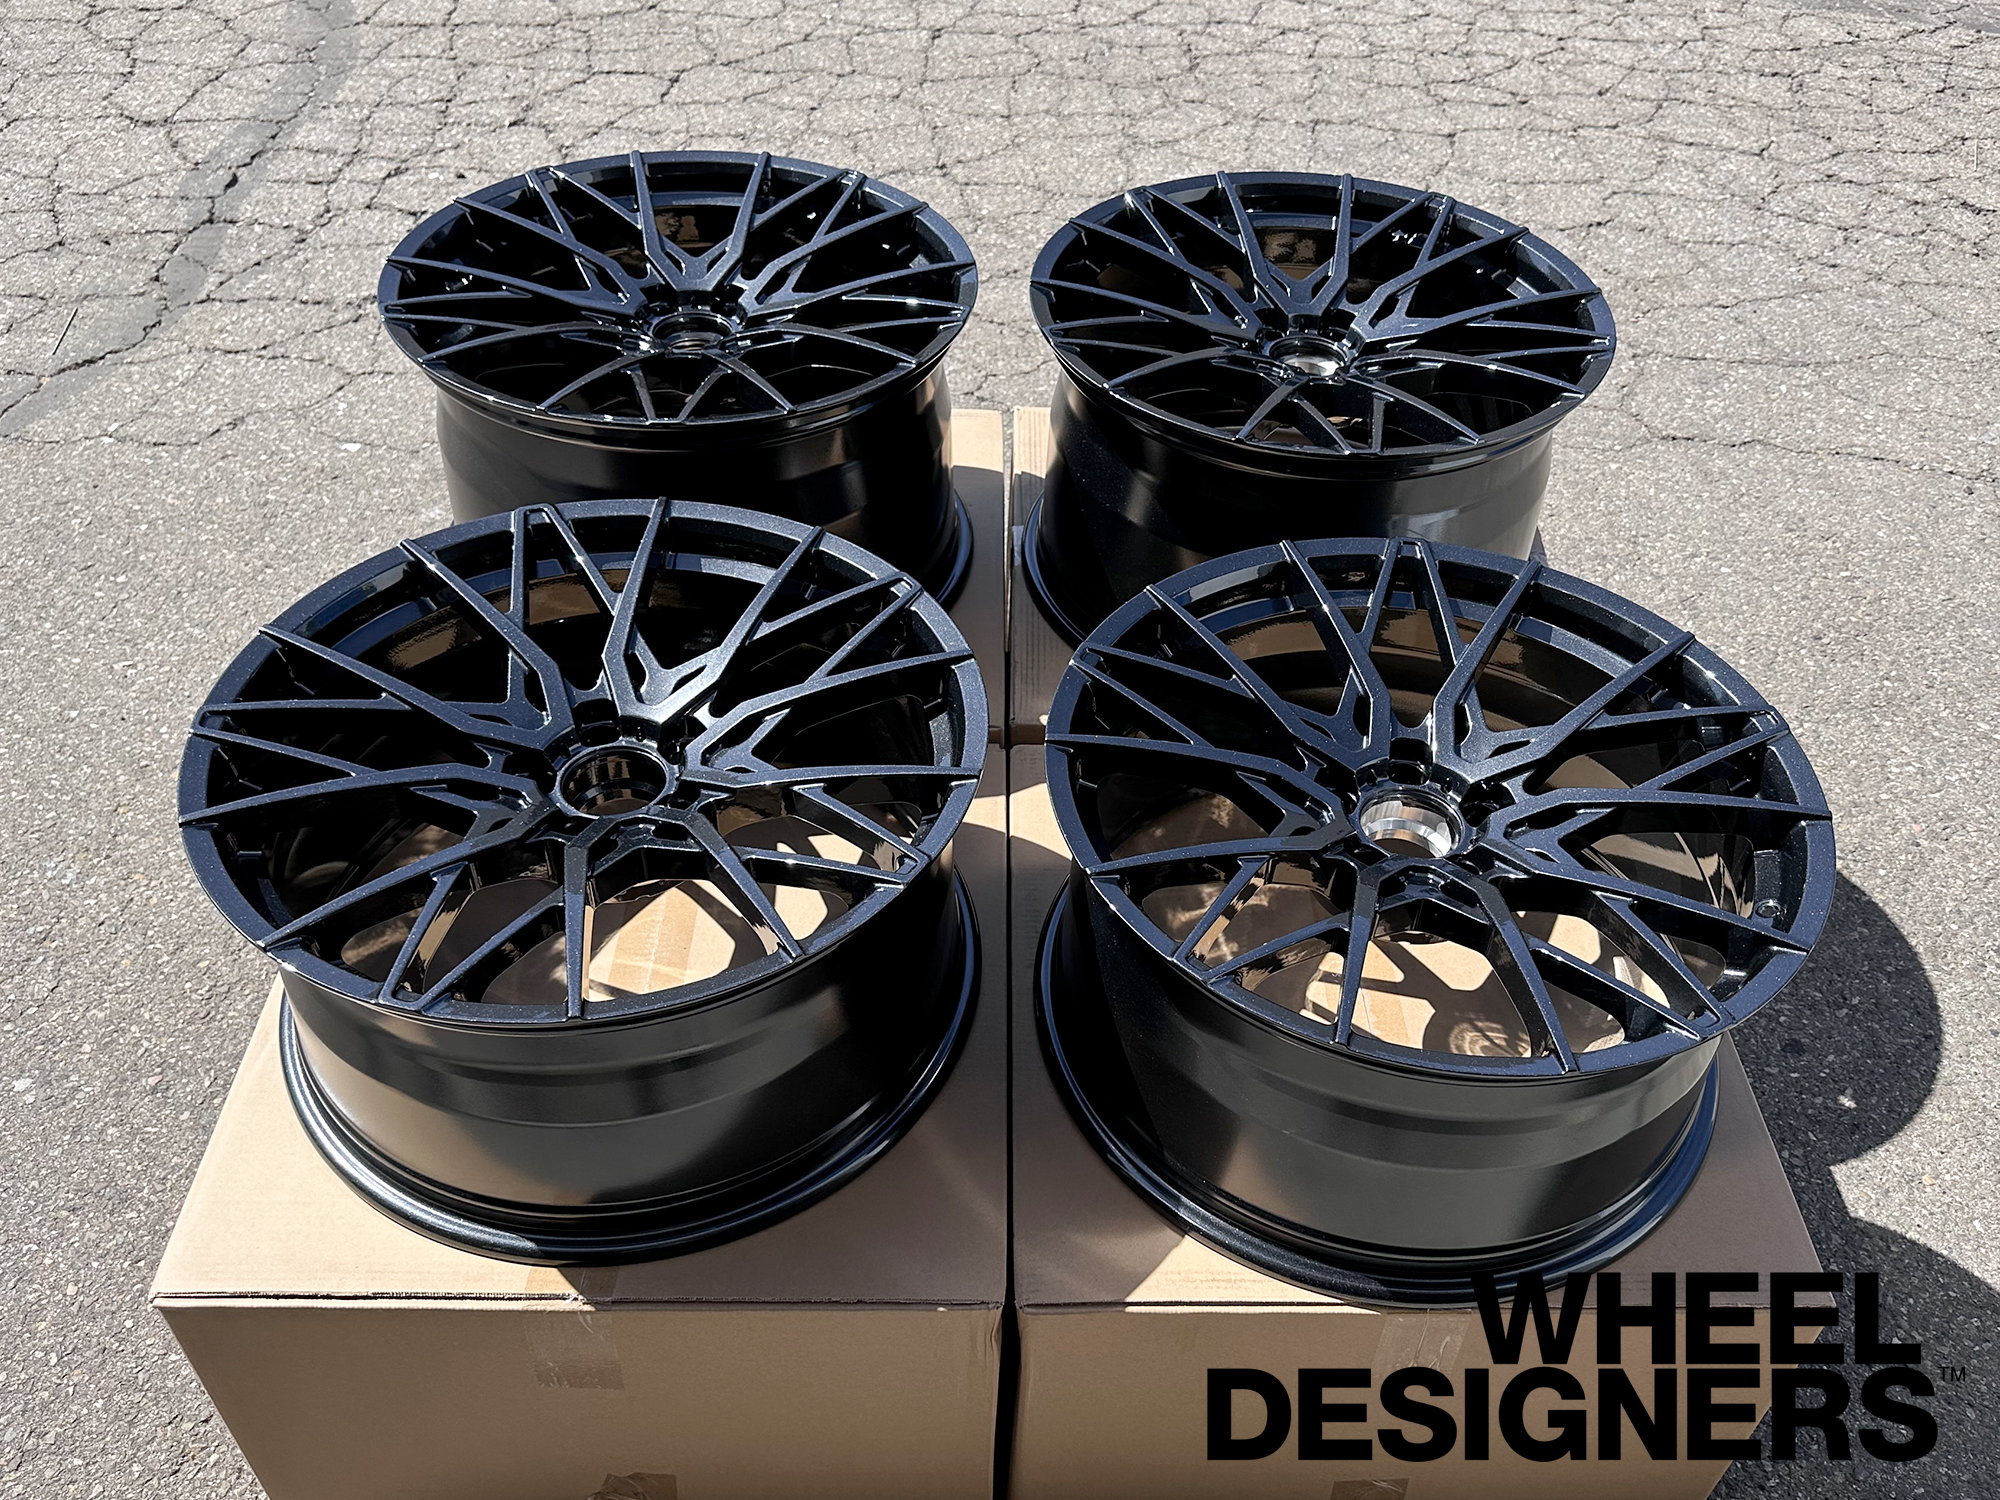 S650 Mustang 19" and 20" Forgedlite Wheels for your S650 Ford Mustang signers_2_86f19bf44bd76d27dc49f79f3eb4476e43a8bcd5